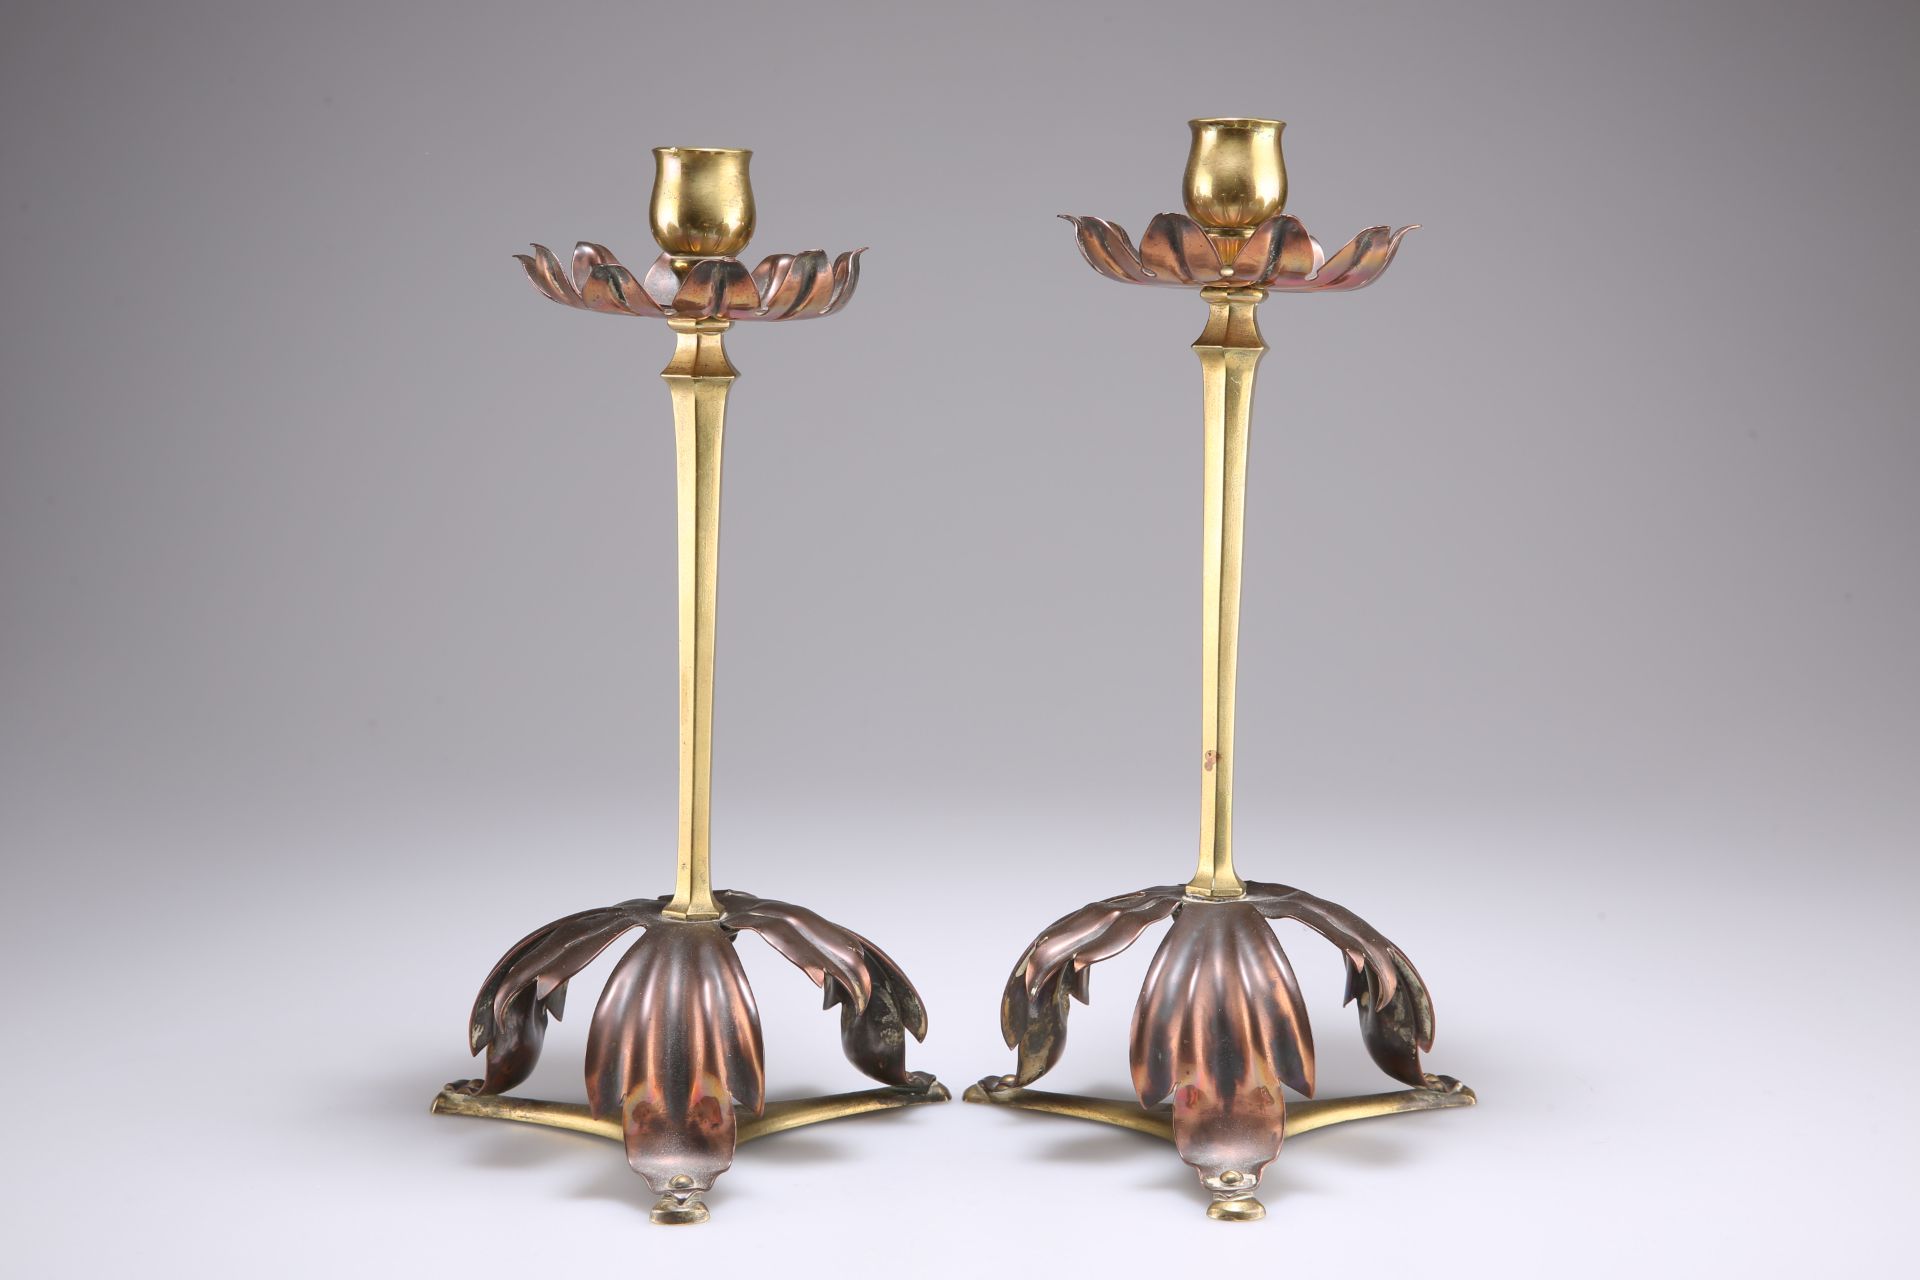 WILLIAM ARTHUR SMITH (W.A.S) BENSON (1854-1924), A PAIR OF ARTS & CRAFTS BRASS AND COPPER CANDLESTIC - Image 2 of 3